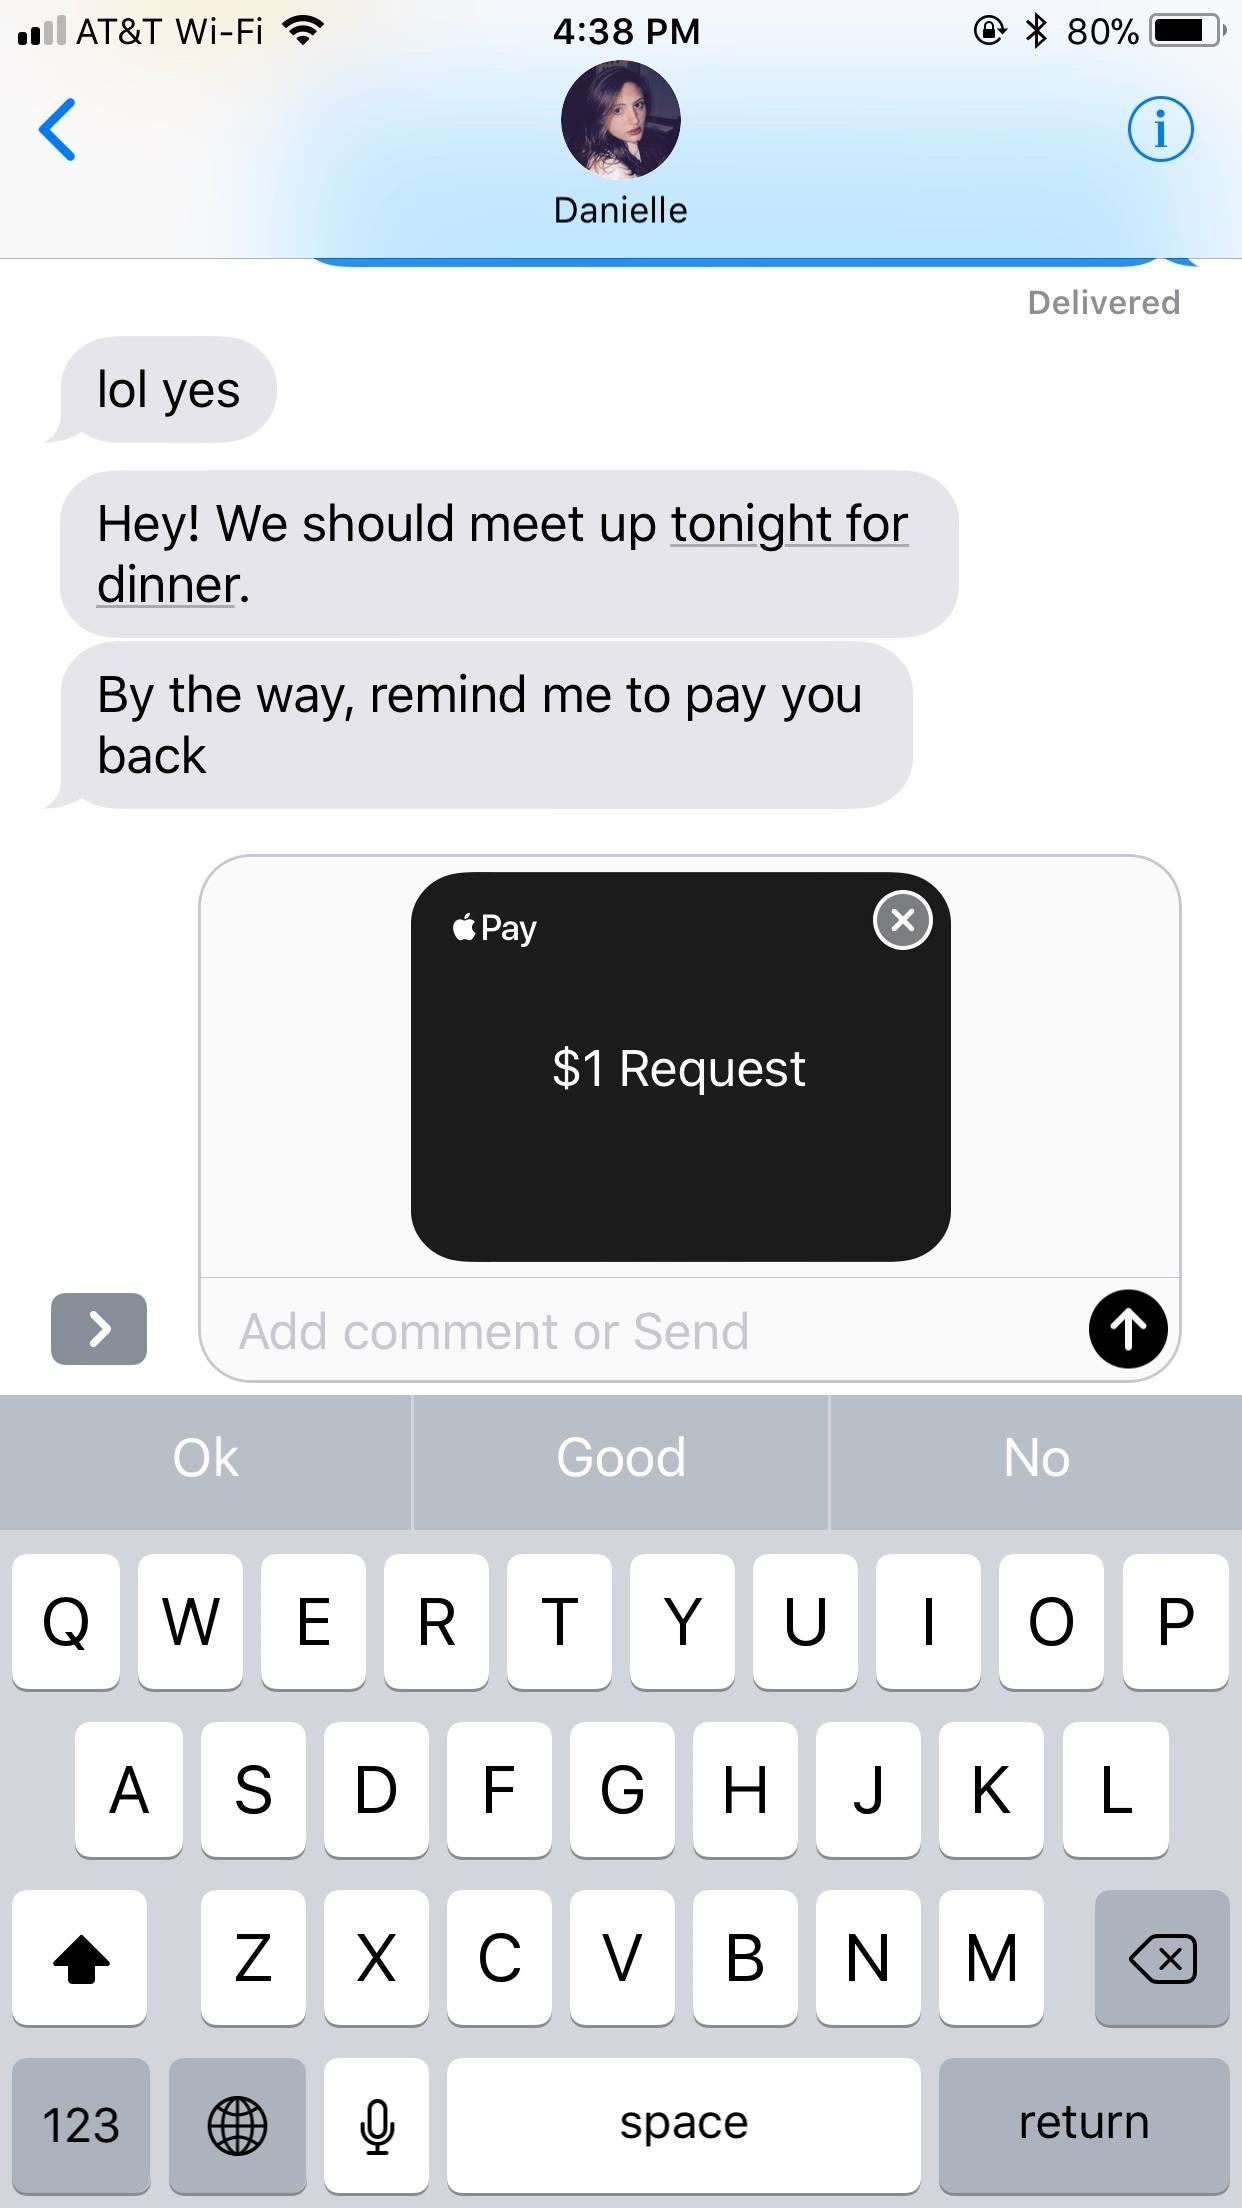 Apple Pay Cash 101: How to Request Money from Friends & Family via iMessage